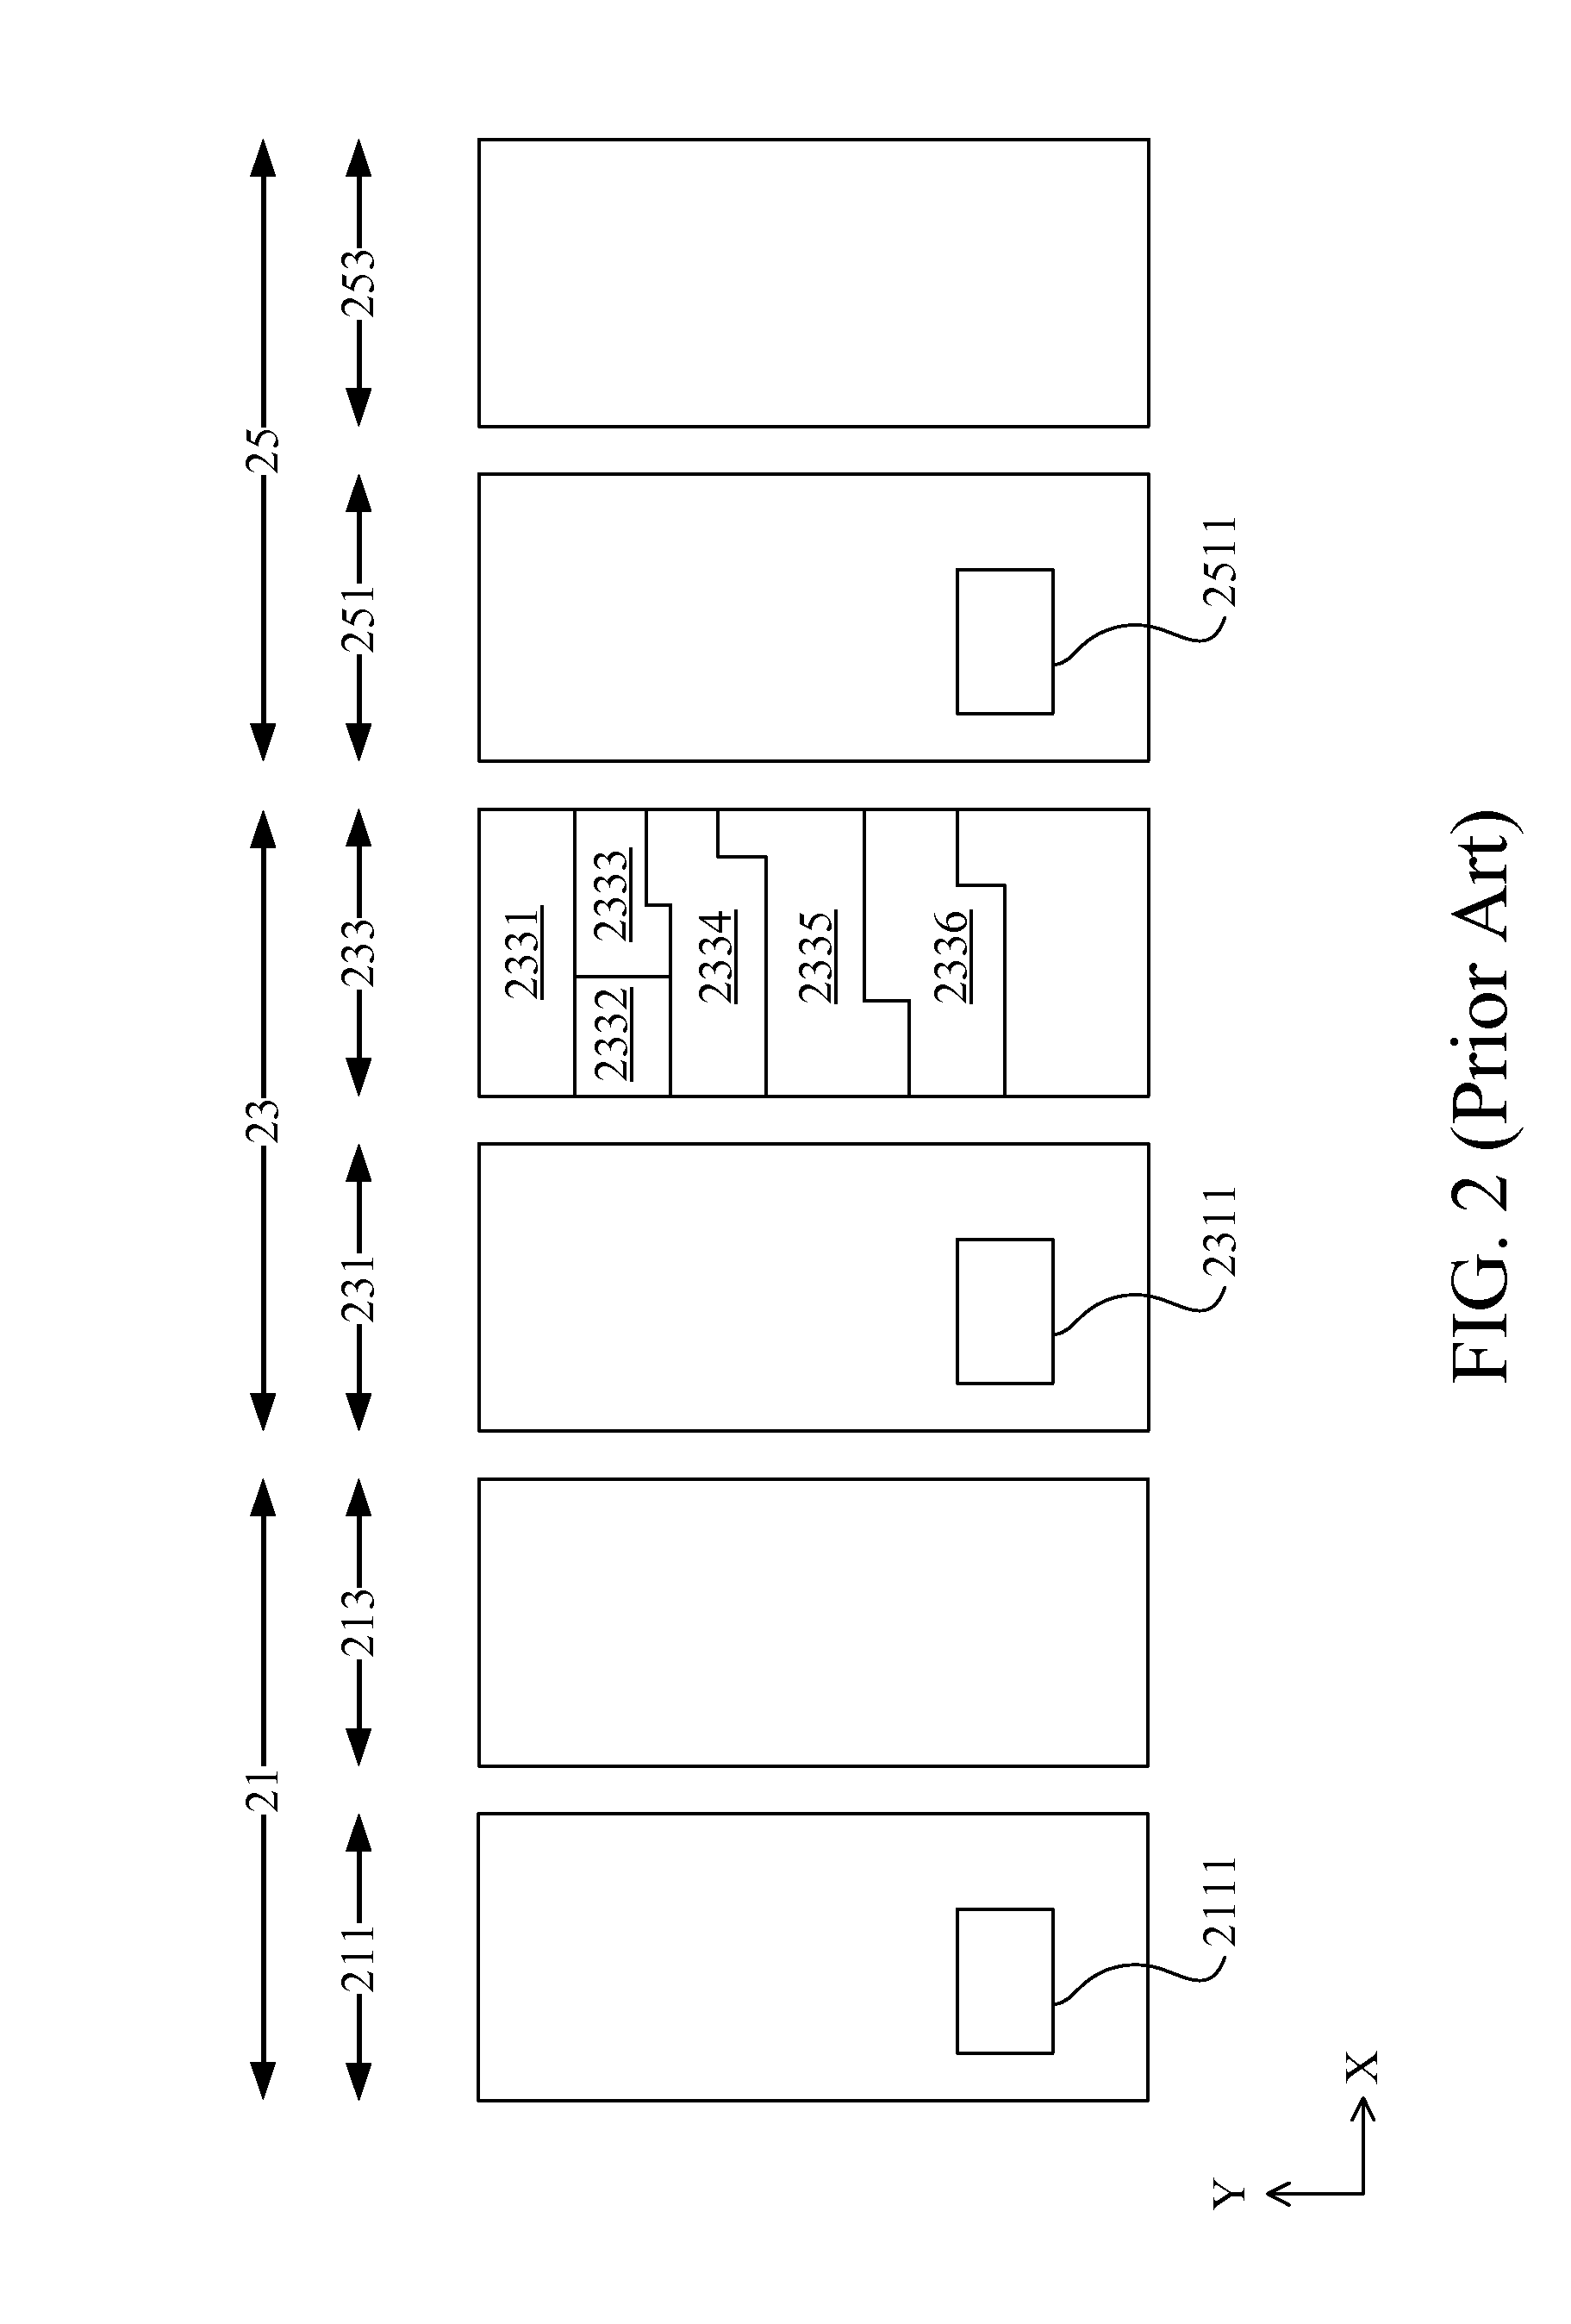 Method and Communication Apparatus for Deciding a Transmitting Region for an Allocated Transmitting Burst in a Frame of an OFDMA System